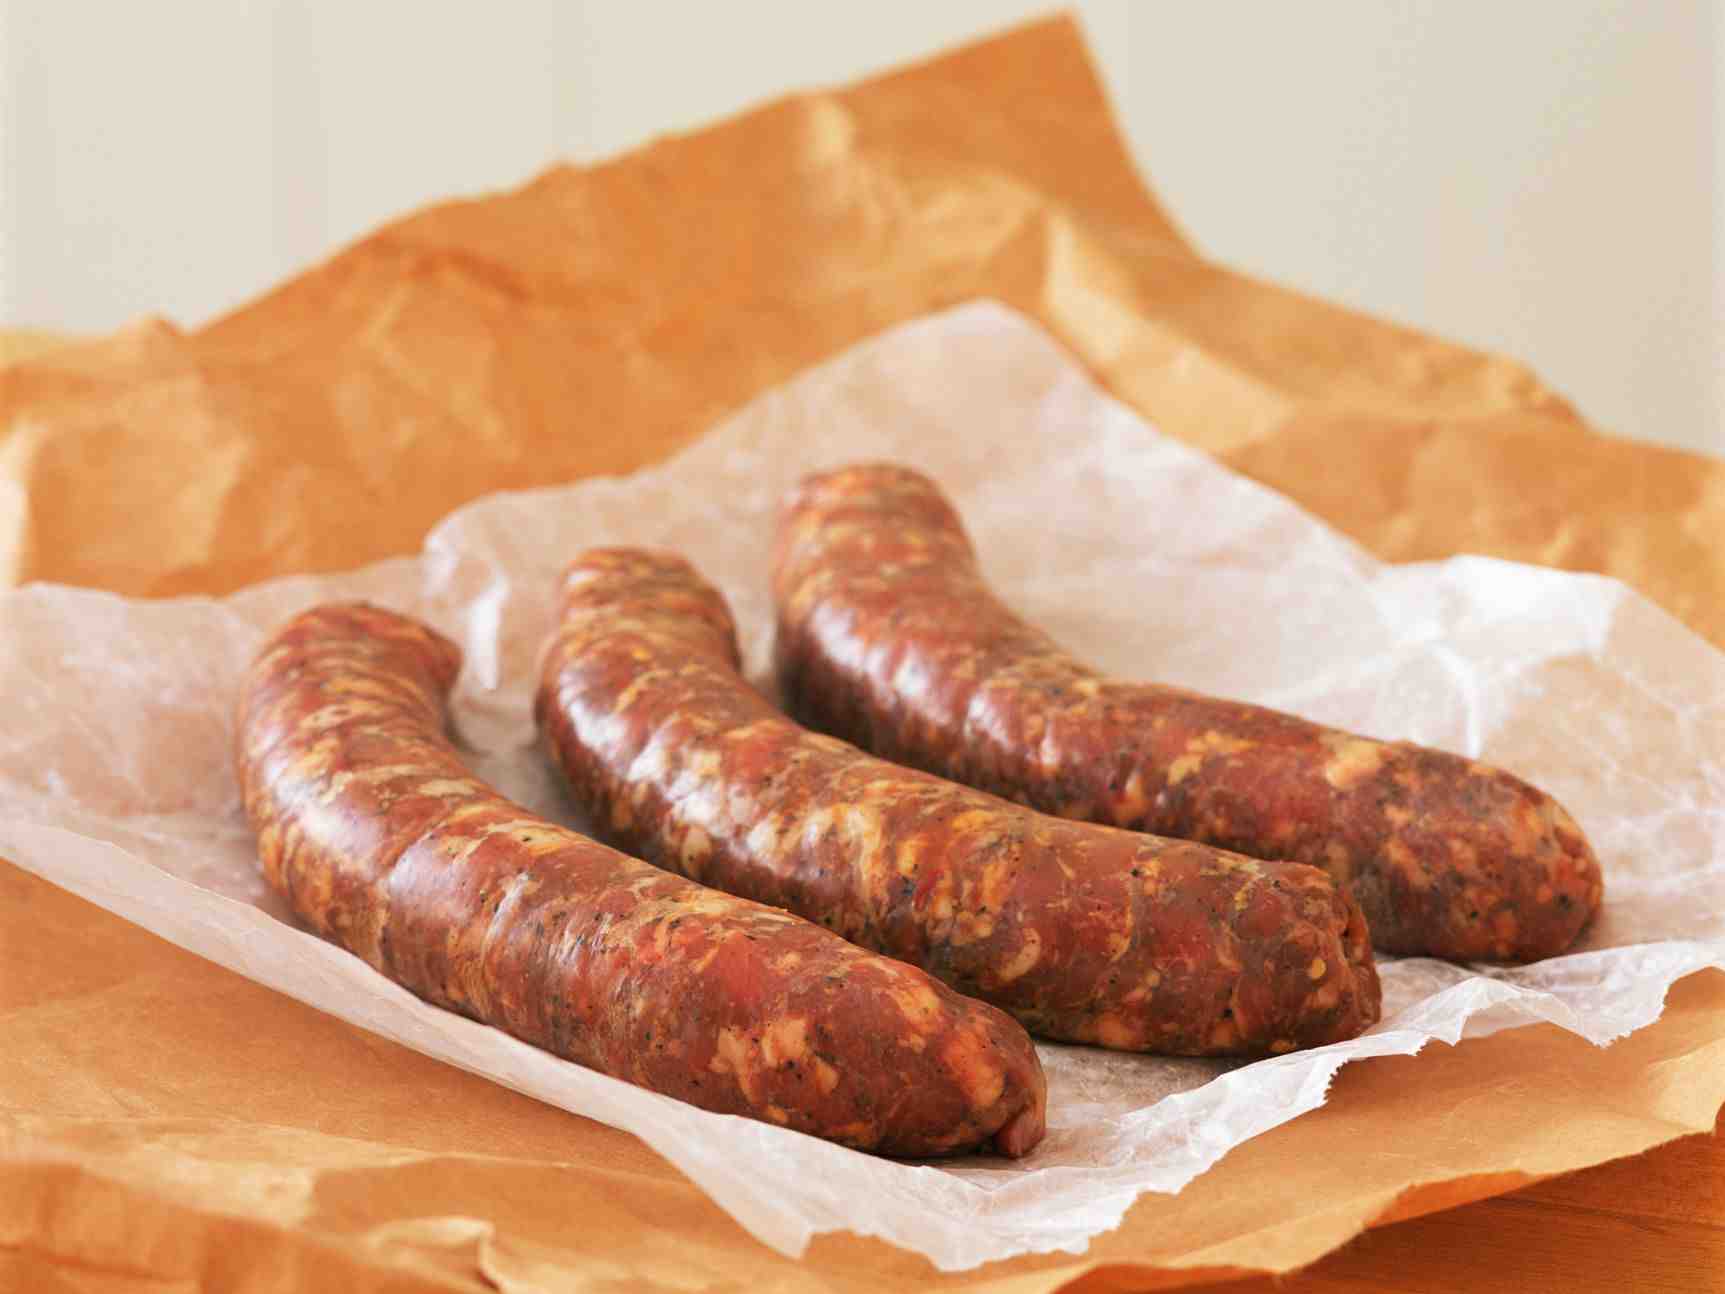 What is the difference between andouille and kielbasa?